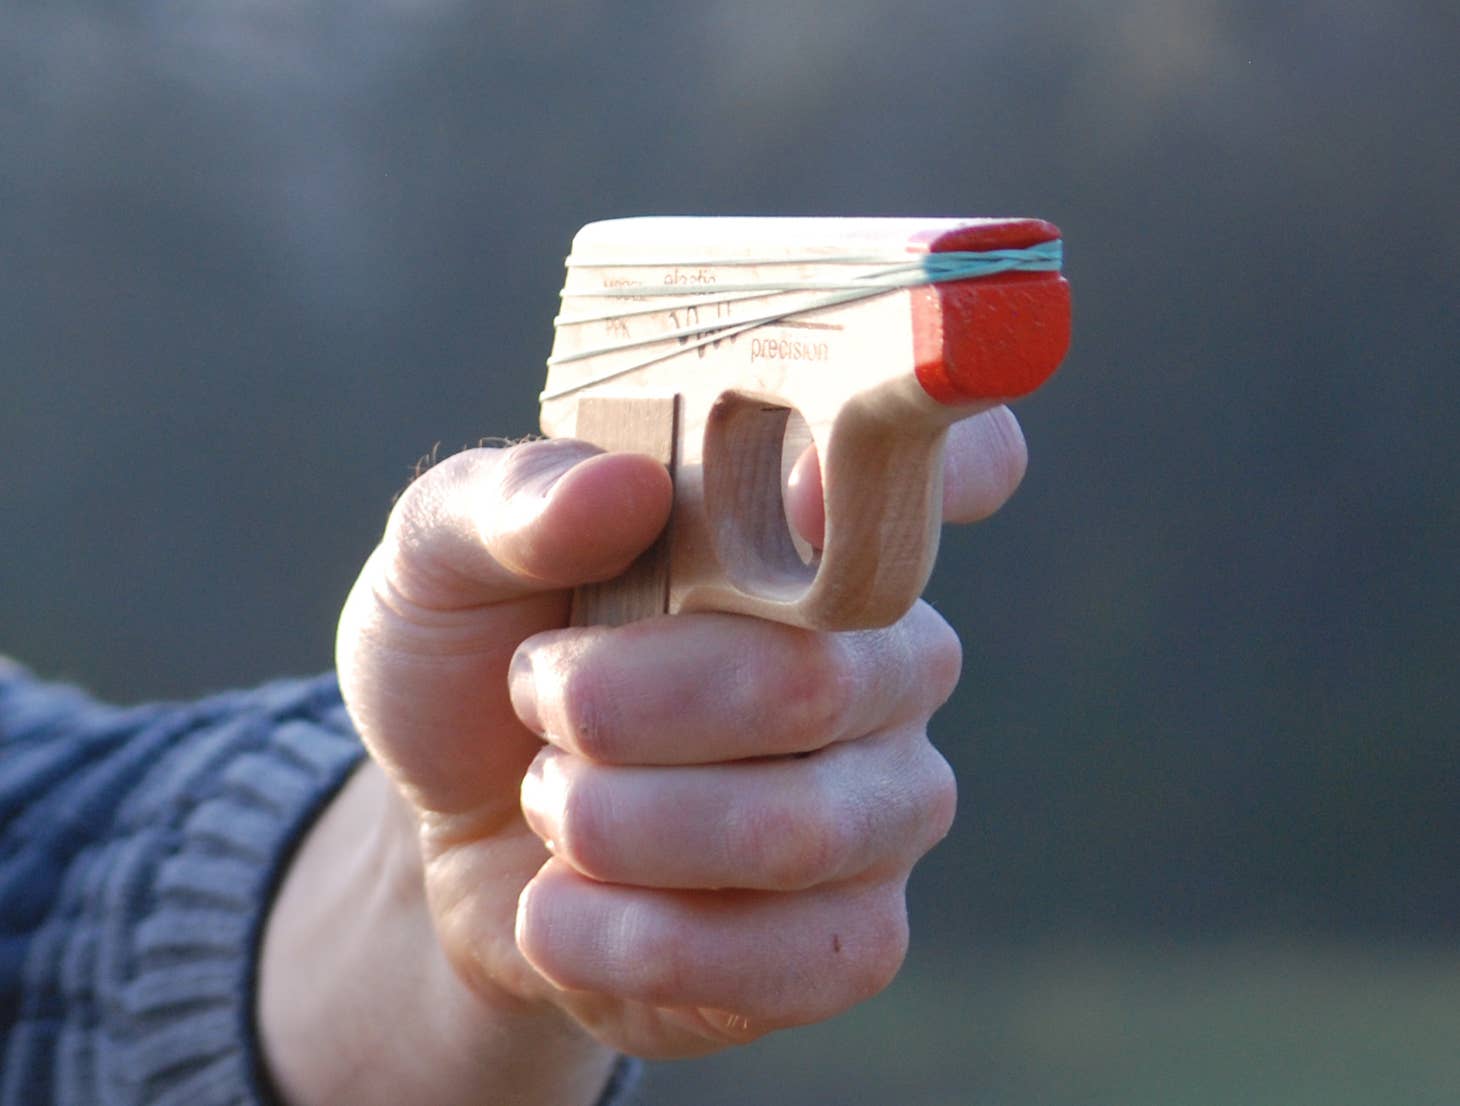 The PPK Wooden Rubber Band Straight Shooter Toy Gun